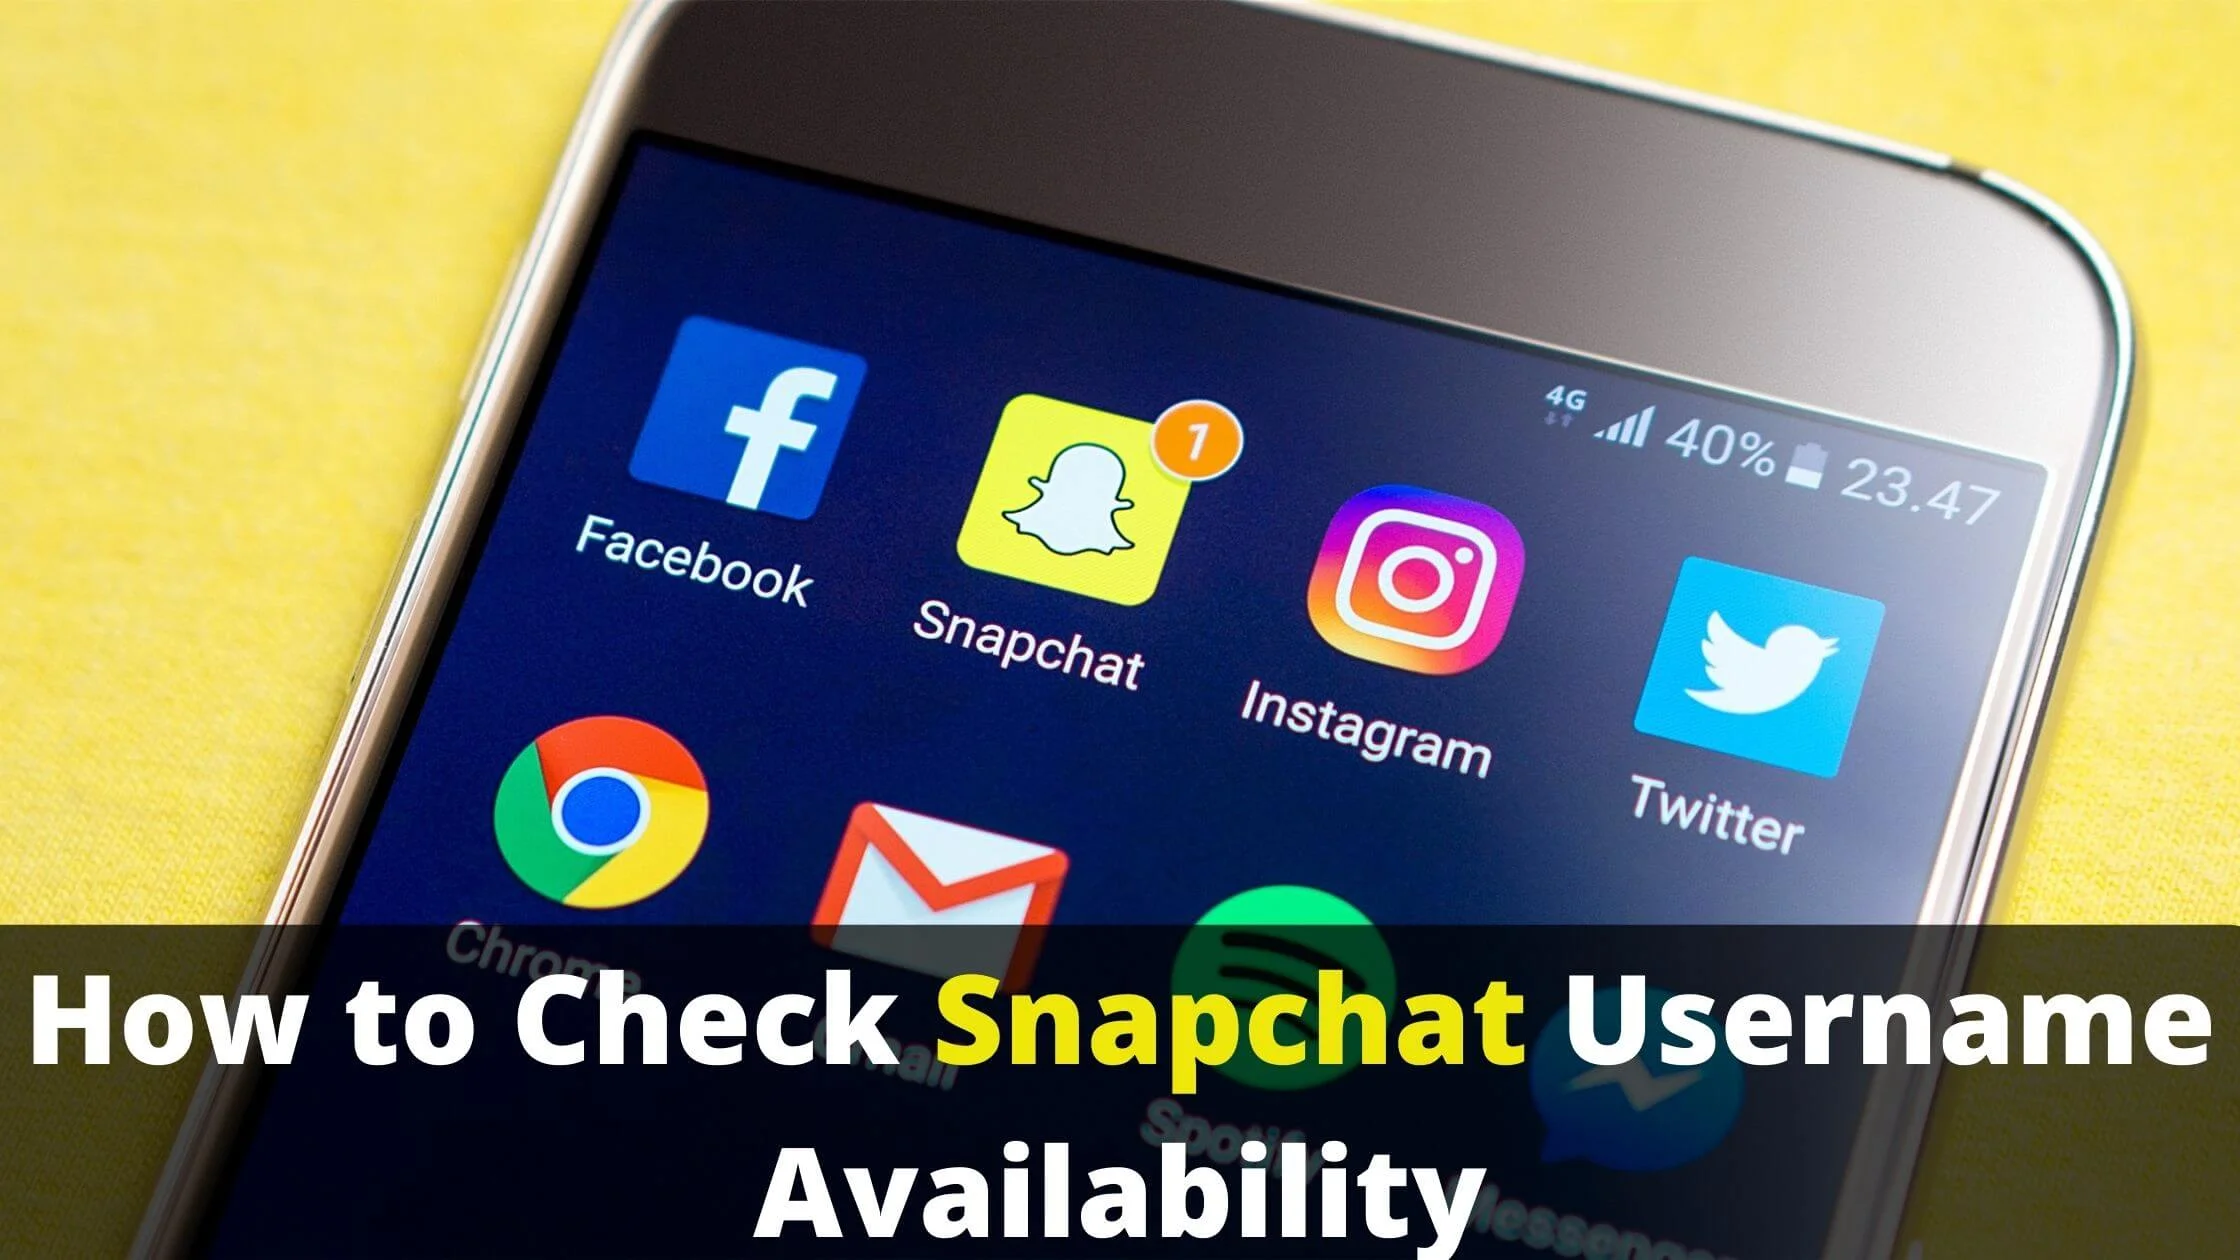 How to Check Snapchat Username Availability